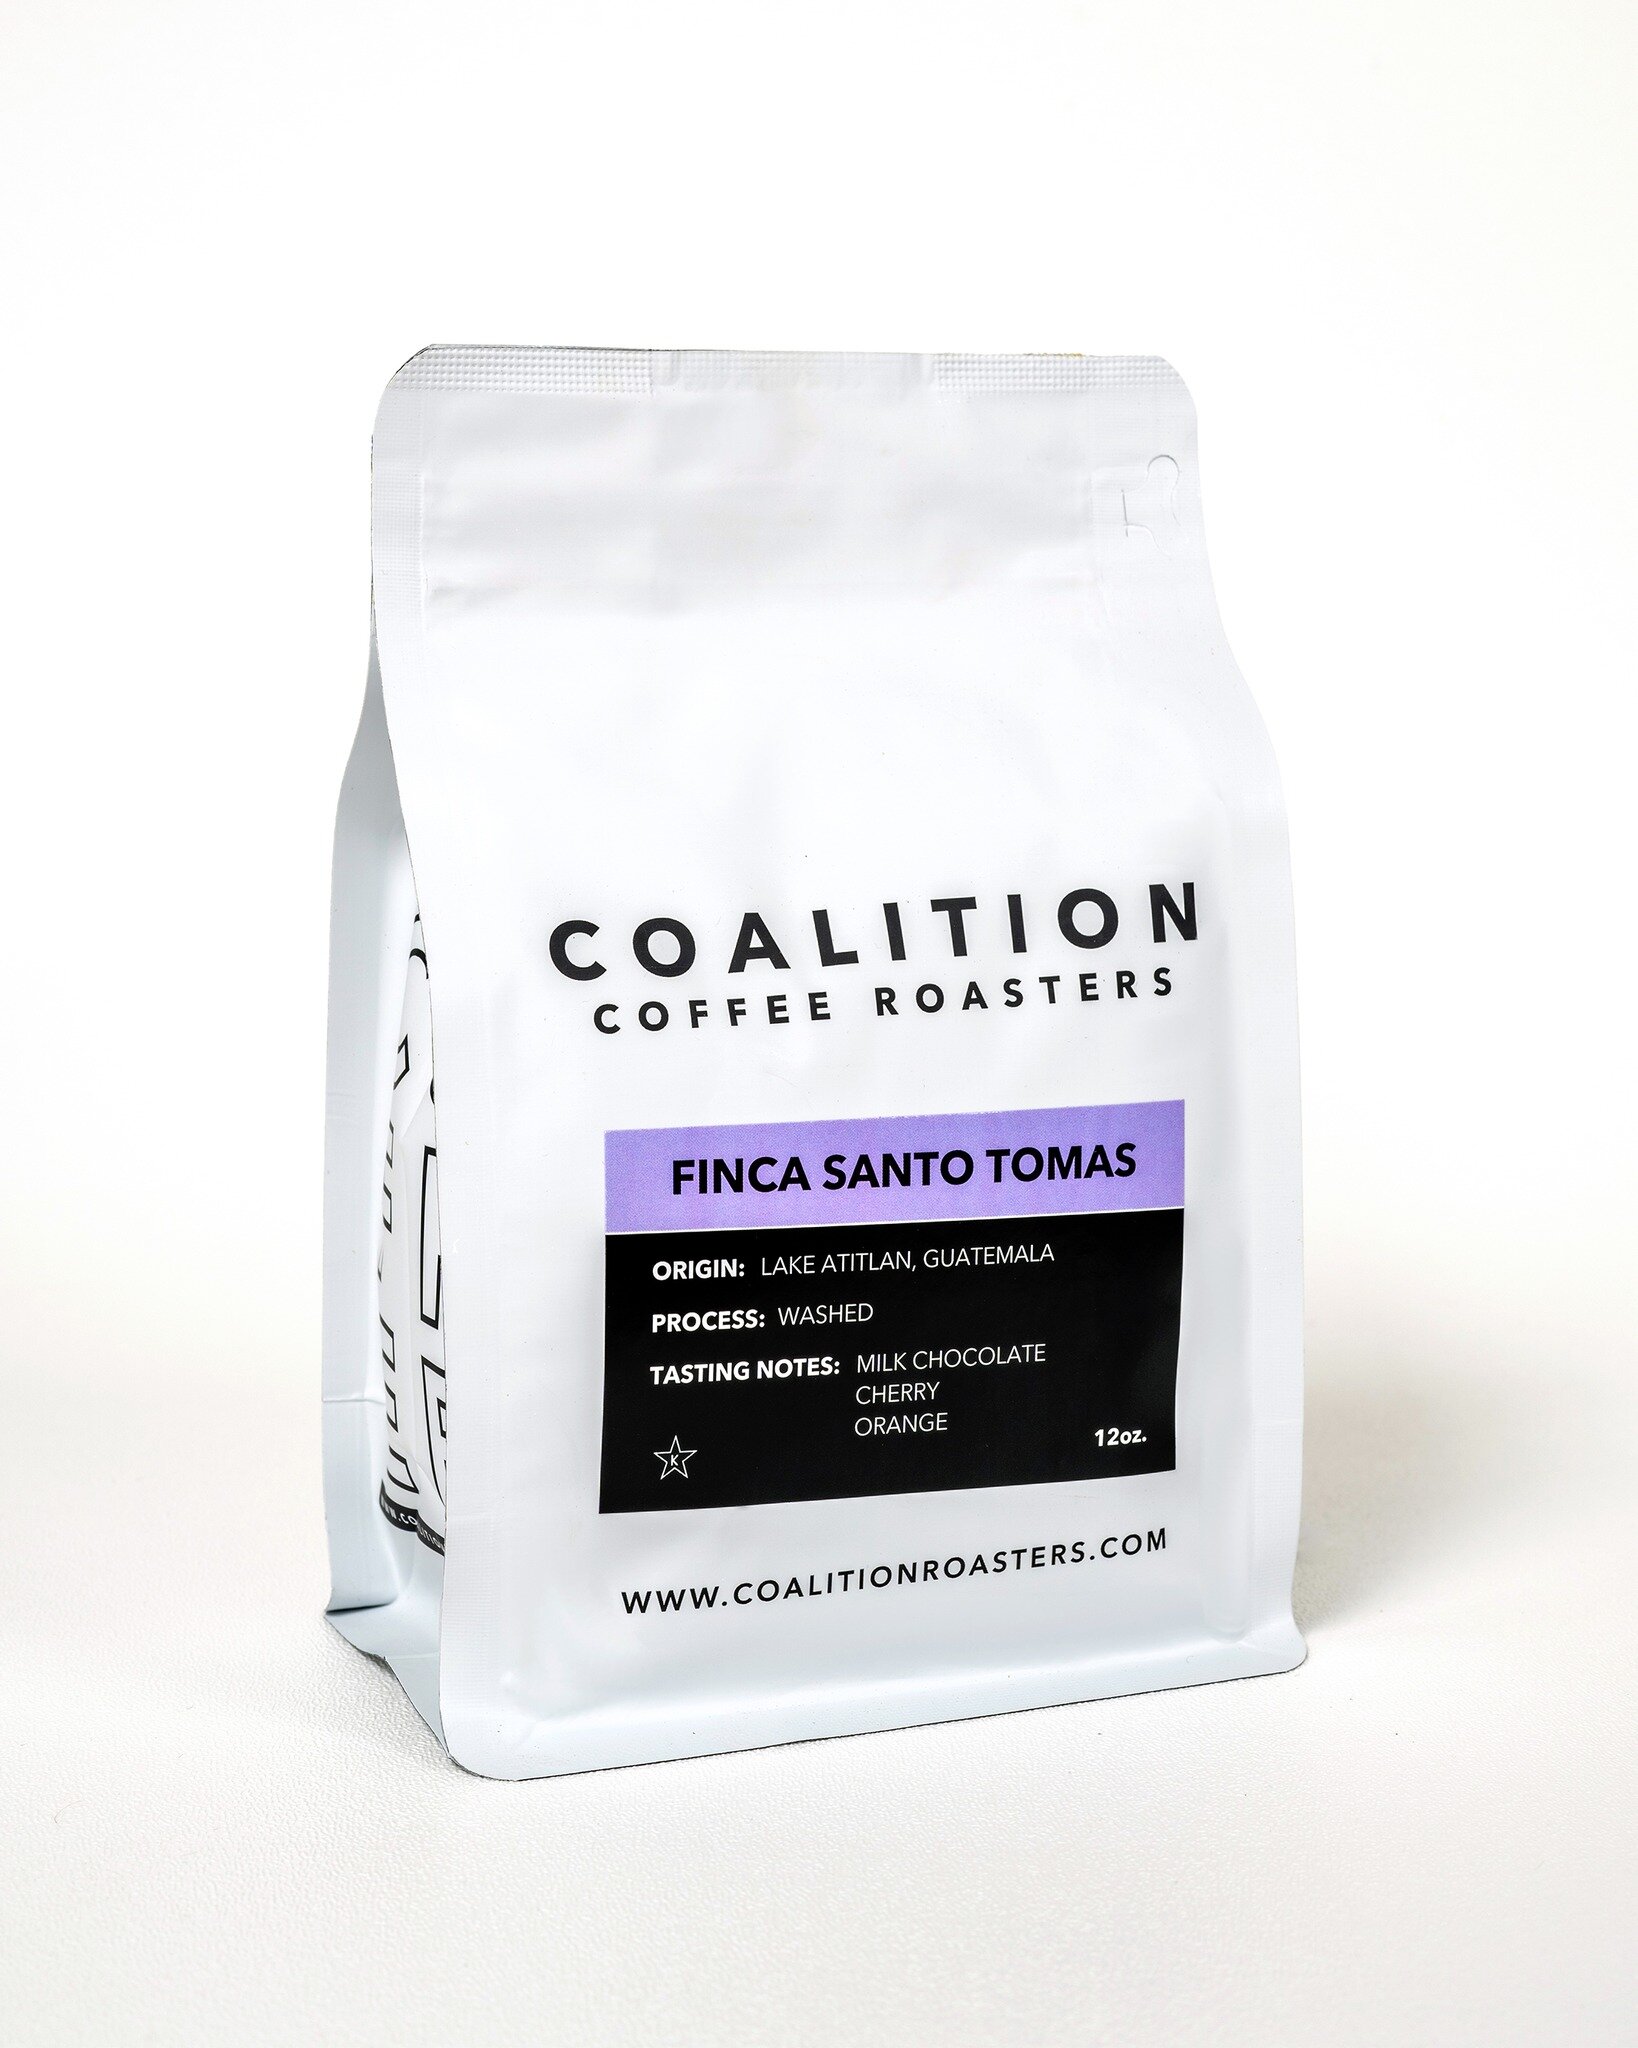 Coalition&rsquo;s Finca Santo Tomas 💜

✨ Origin: Lake Atitlan, Guatemala

✨ Tasting Notes: Milk Chocolate, Cherry, Orange

✨ Owned by the Torrebiarte family, the farm is currently run by the third generation, Javier Torrebiarte. Javier studied in th